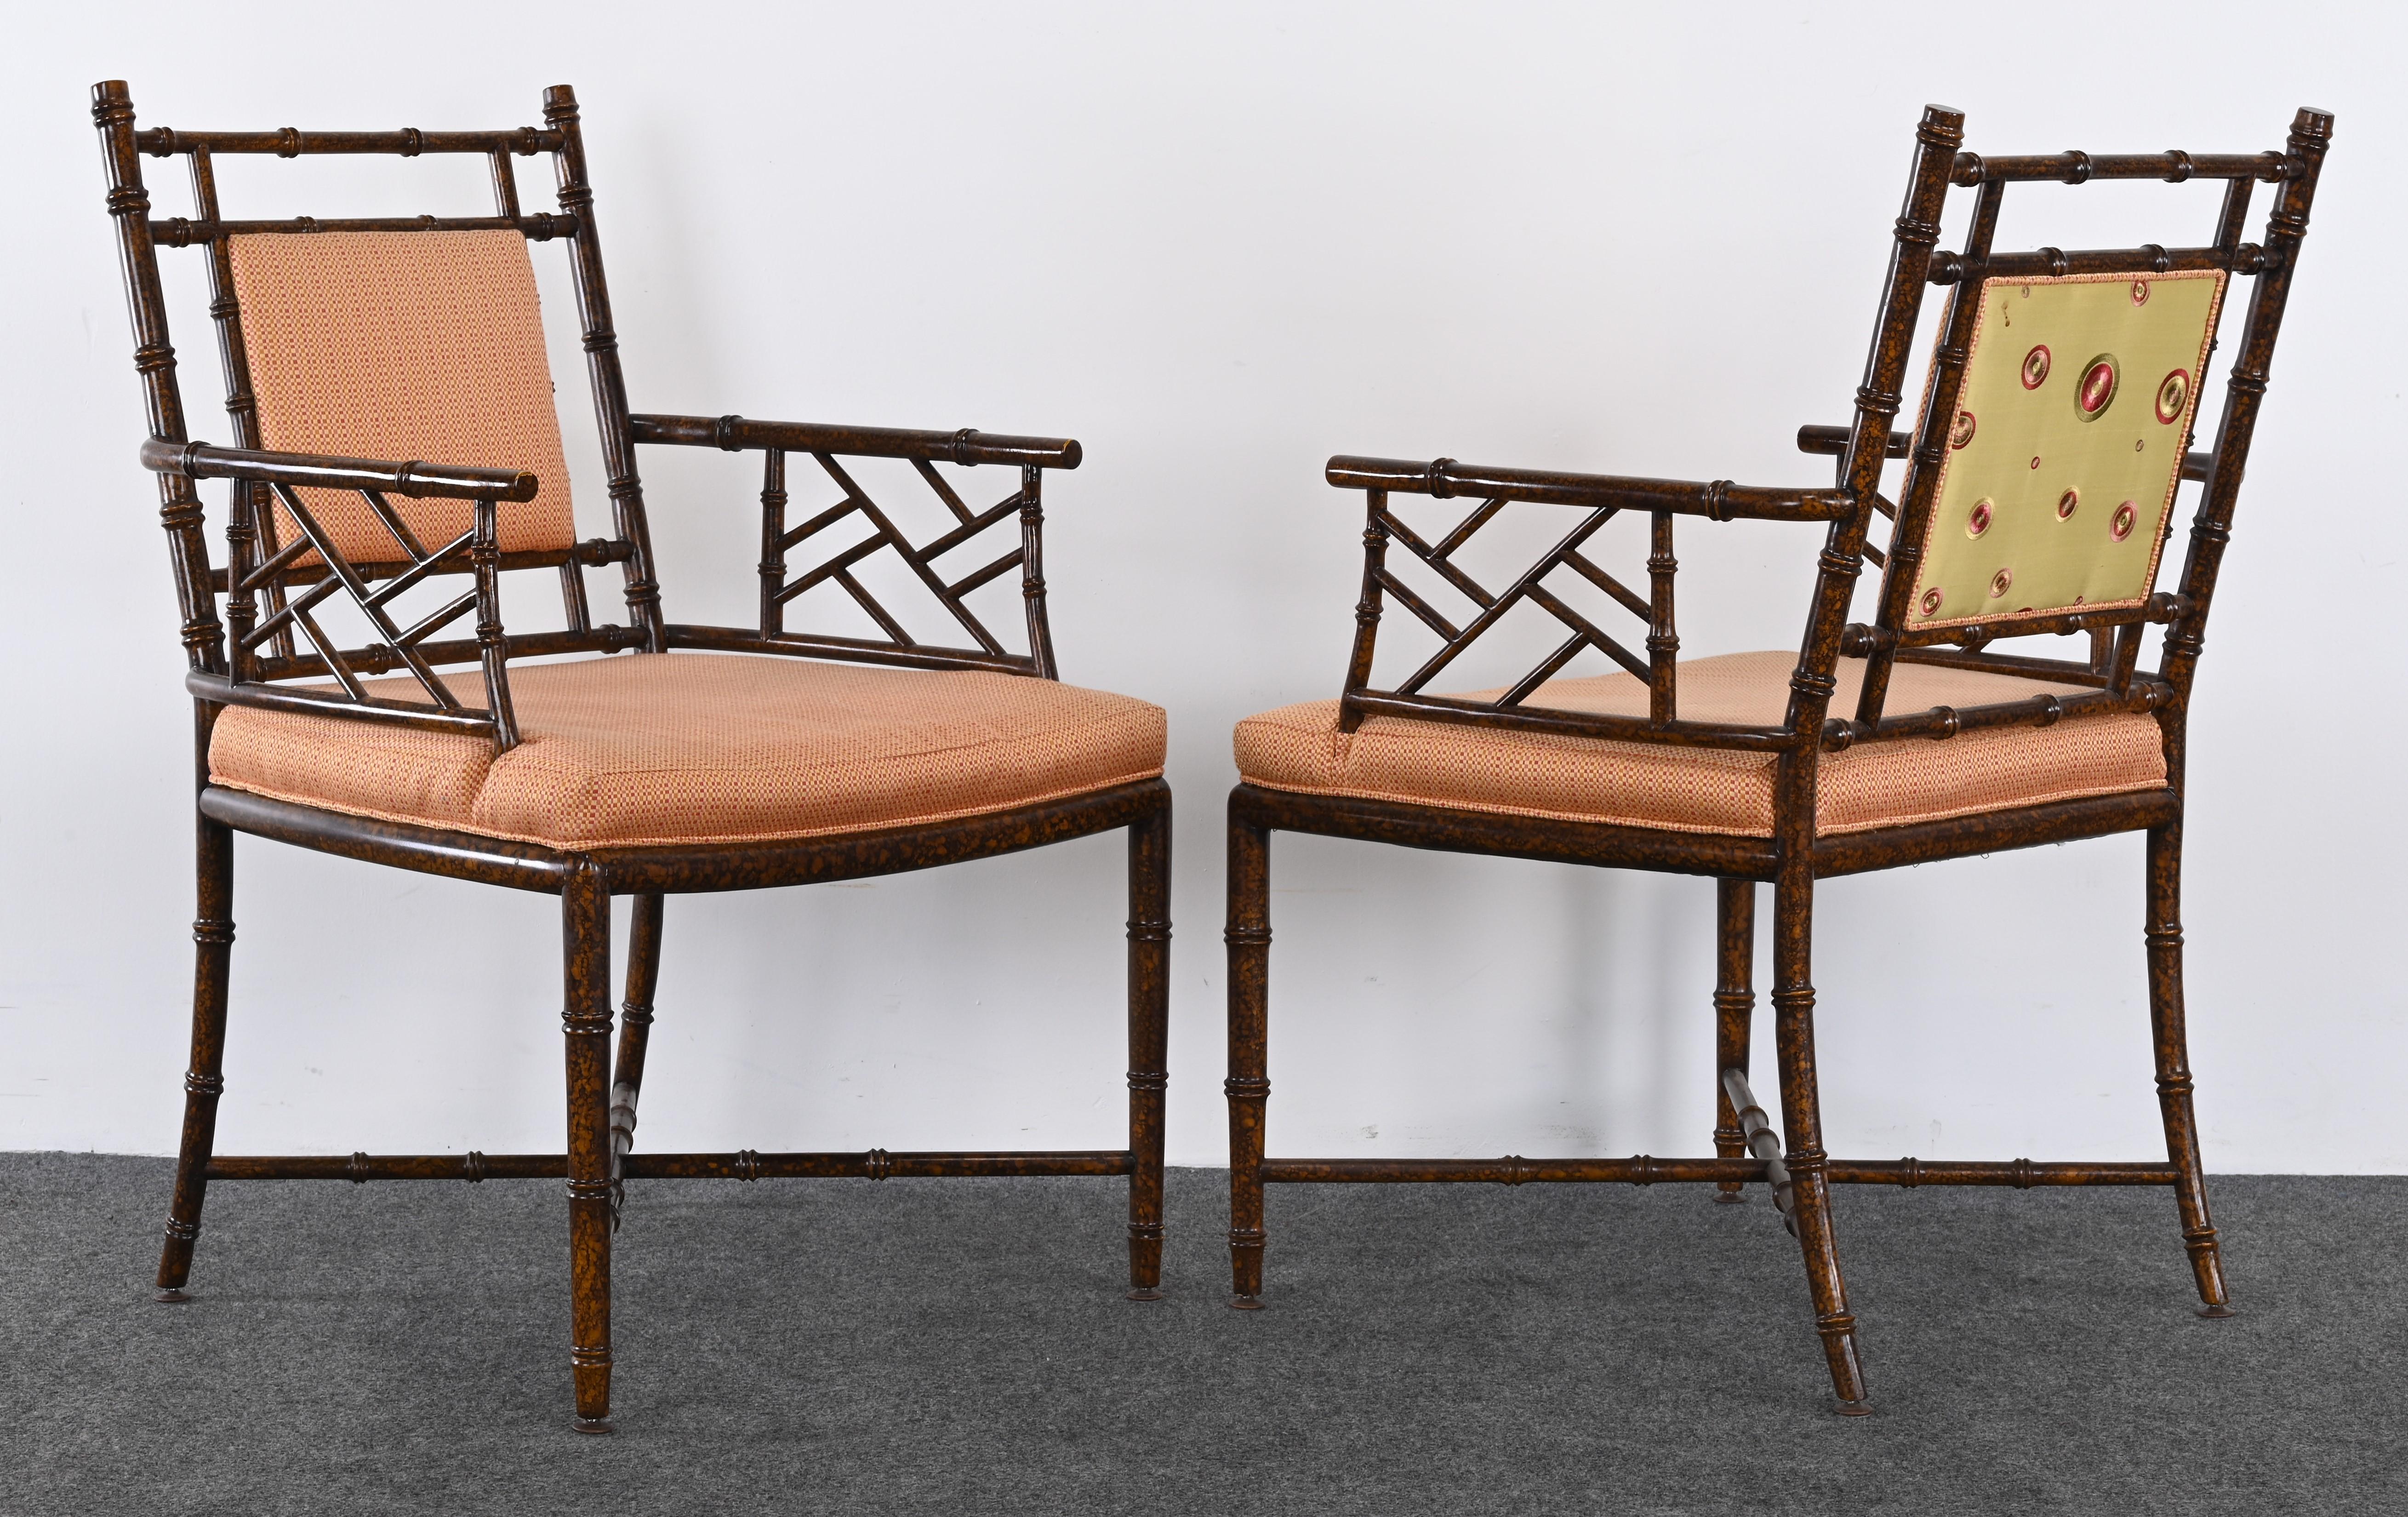 A pair of Faux Bamboo Regency or Chinese Chippendale style armchairs by Pearson labeled 2018. The frame is made of maple wood. The decorative armchairs are structurally sound with minimal minor wear to finish, as shown in the images. New upholstery